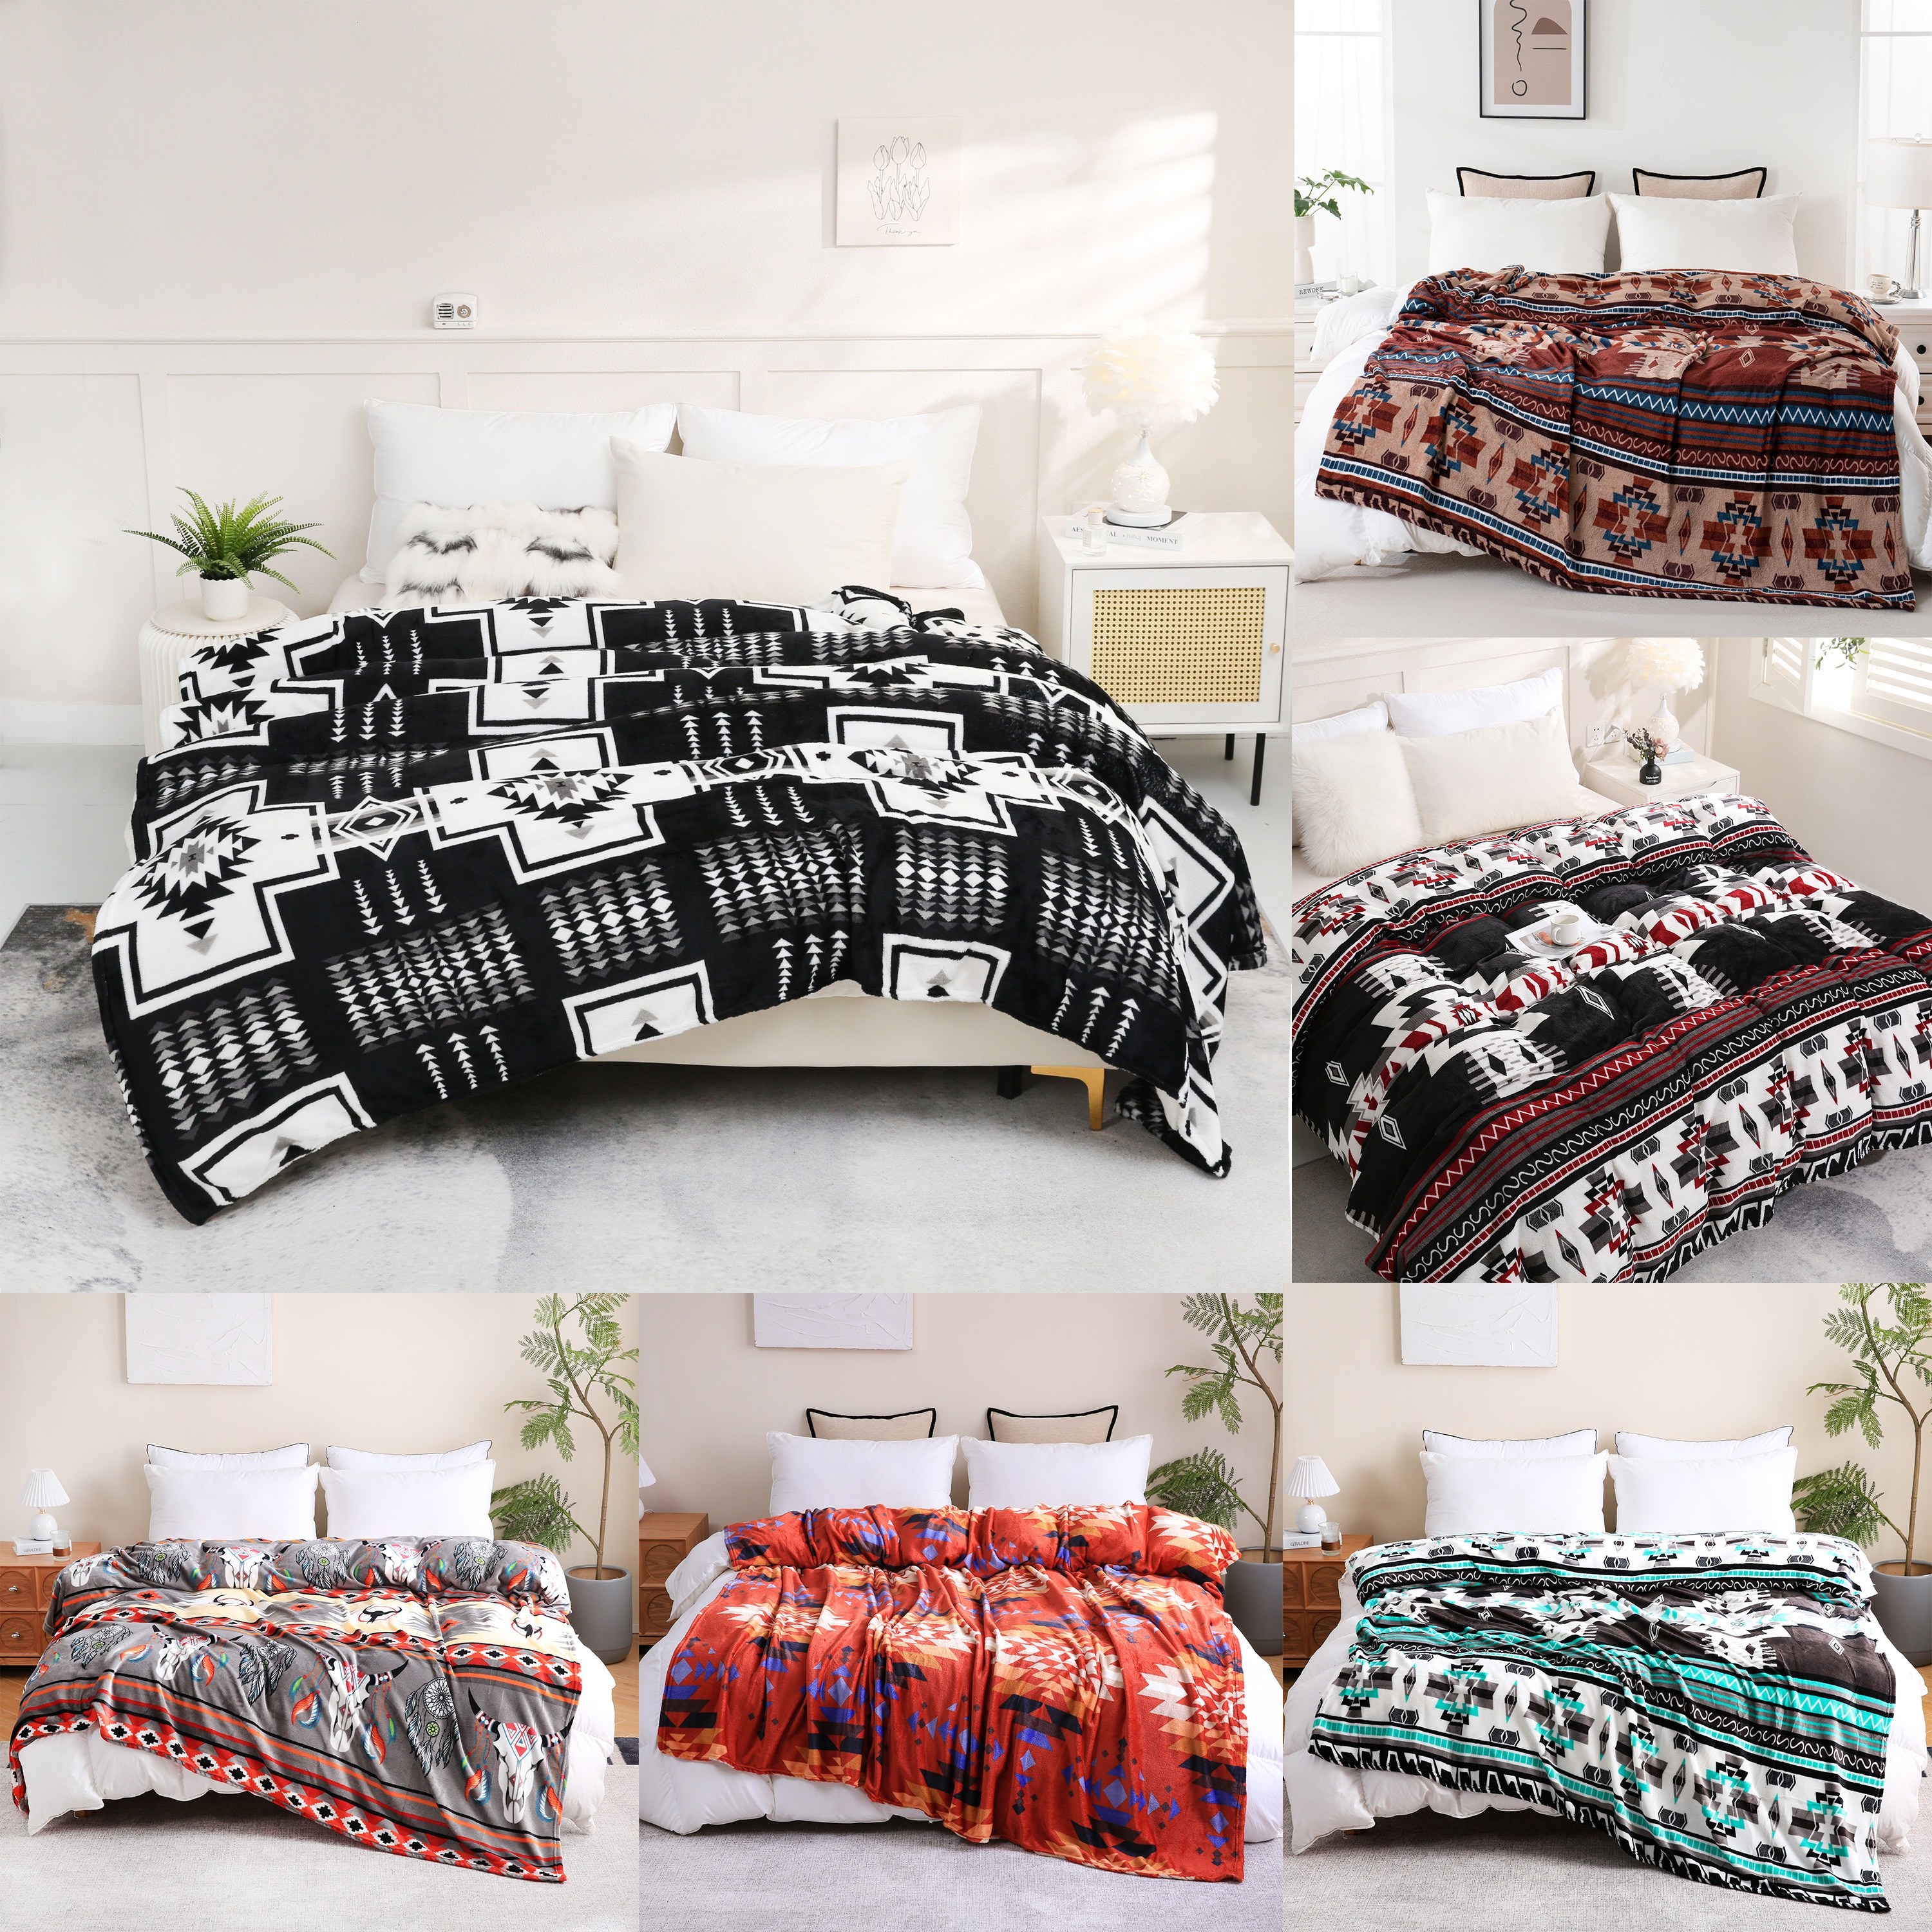 

1pc 200gsm Blanket, Ethnic Style Flannel Blanket, Soft Warm Throw Blanket Nap Blanket For Couch Sofa Office Bed Camping Travel, Multi-purpose Gift Blanket For All Season